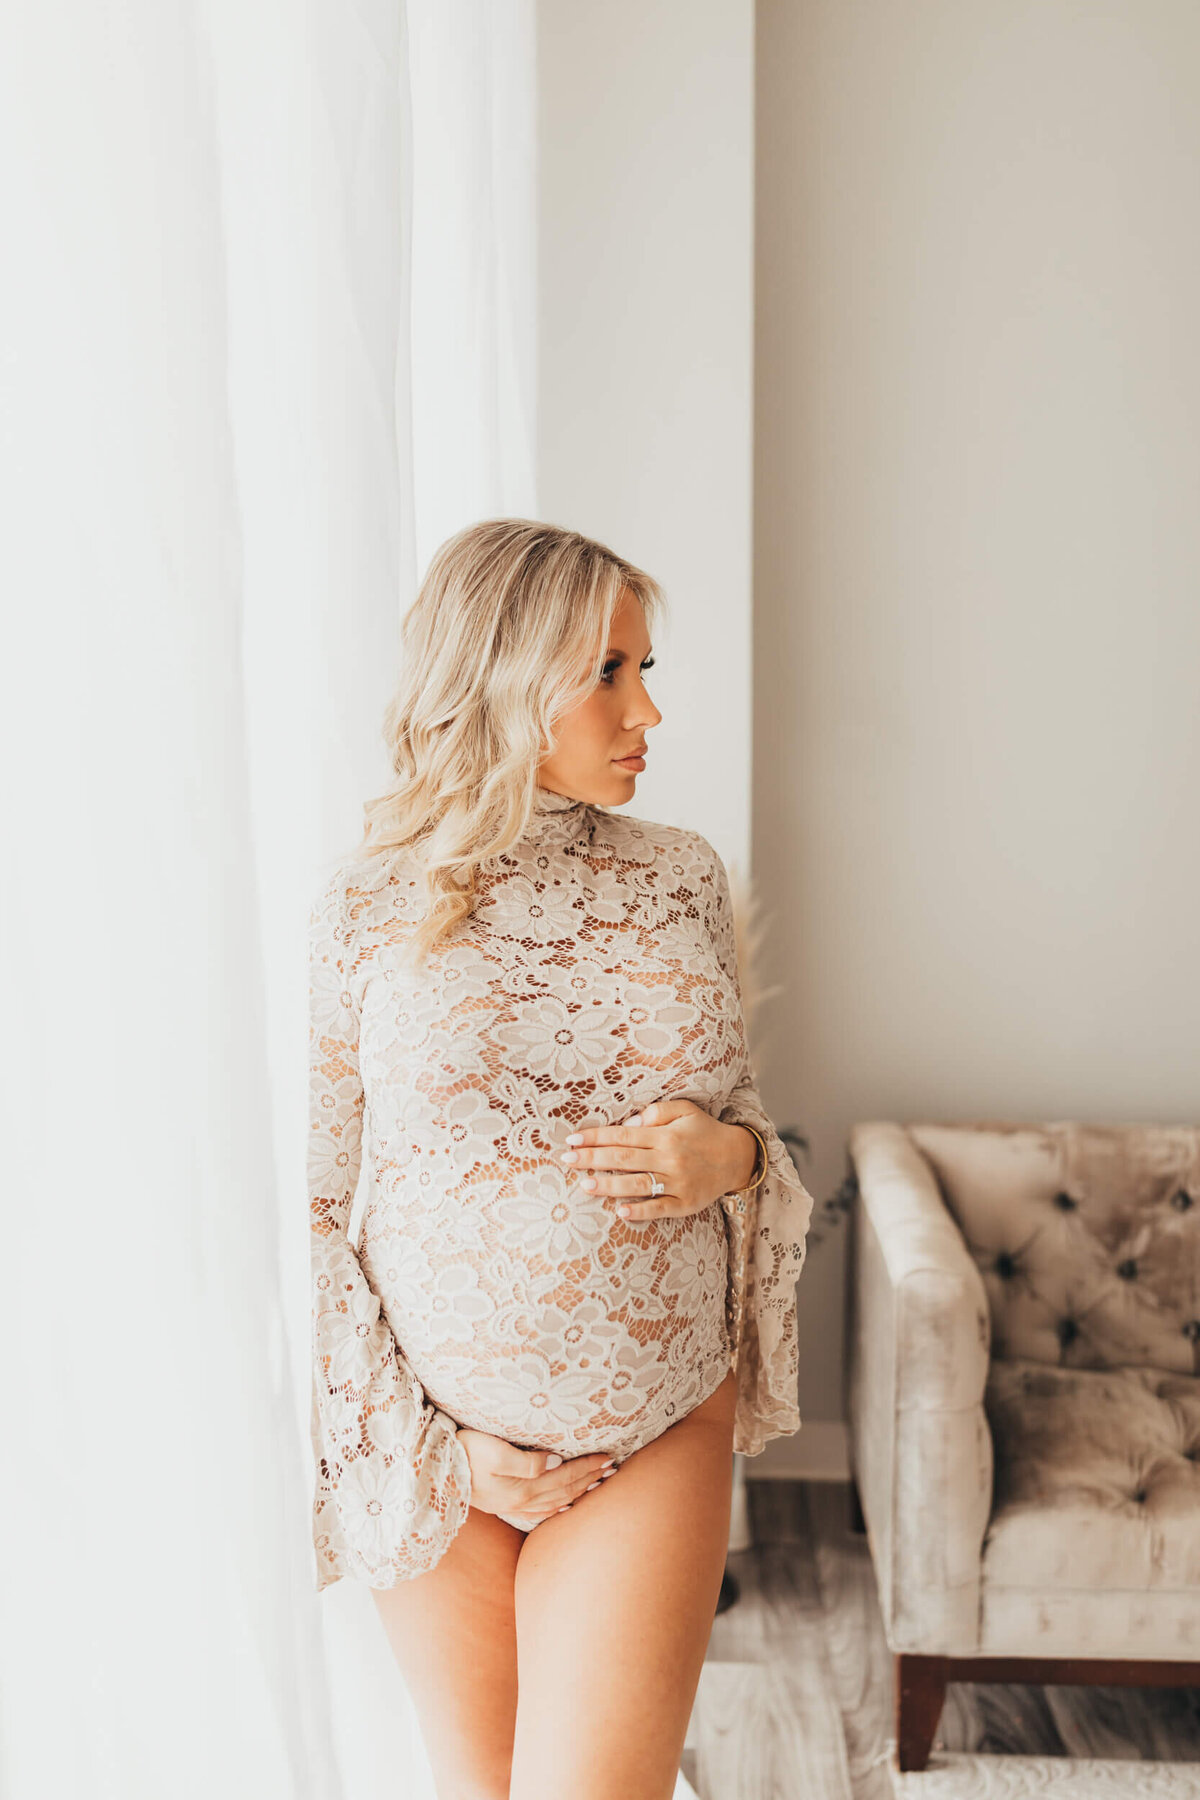 woman looks away, deep in thought, about her baby boy being born soon while standing in front of window, wearing nude bodysuit.